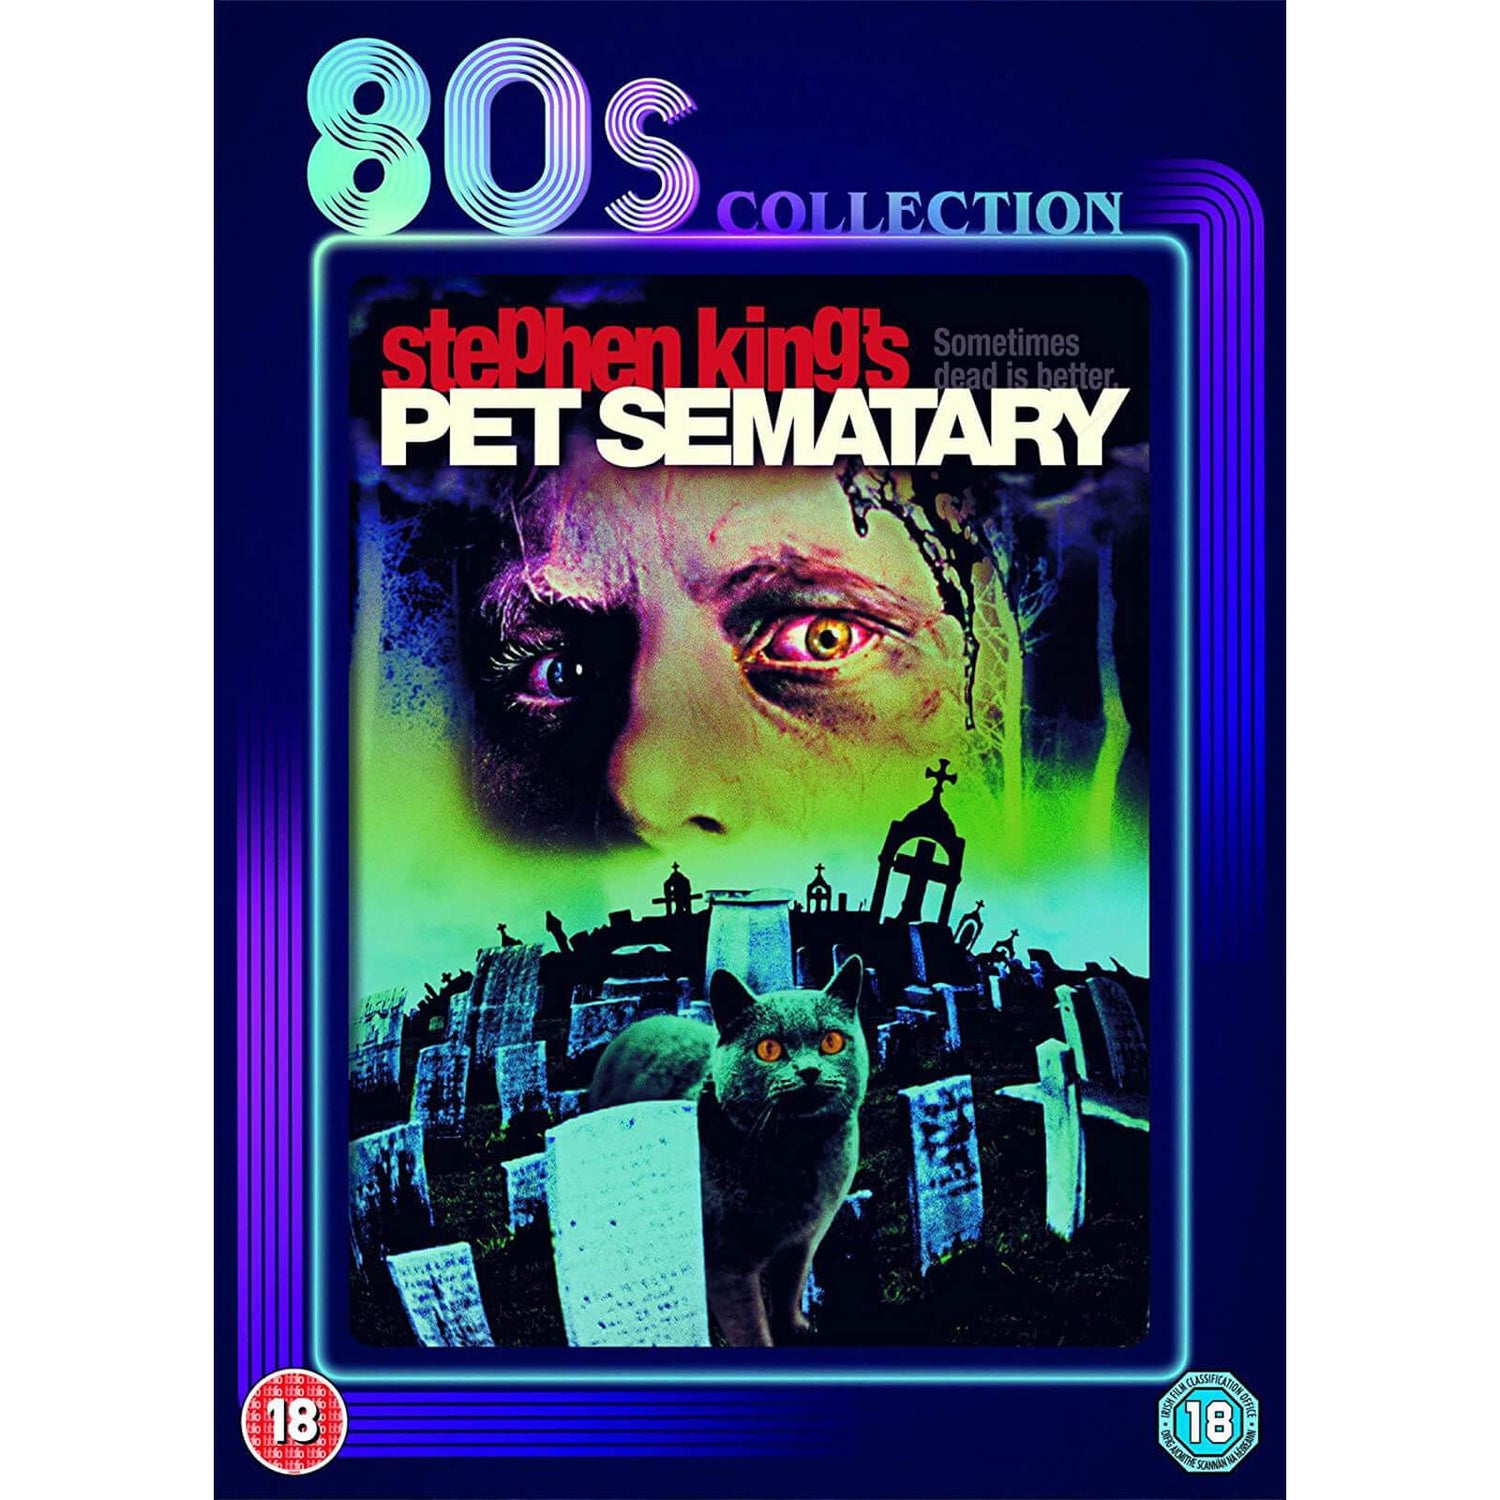 Pet Sematary - 80s Collection